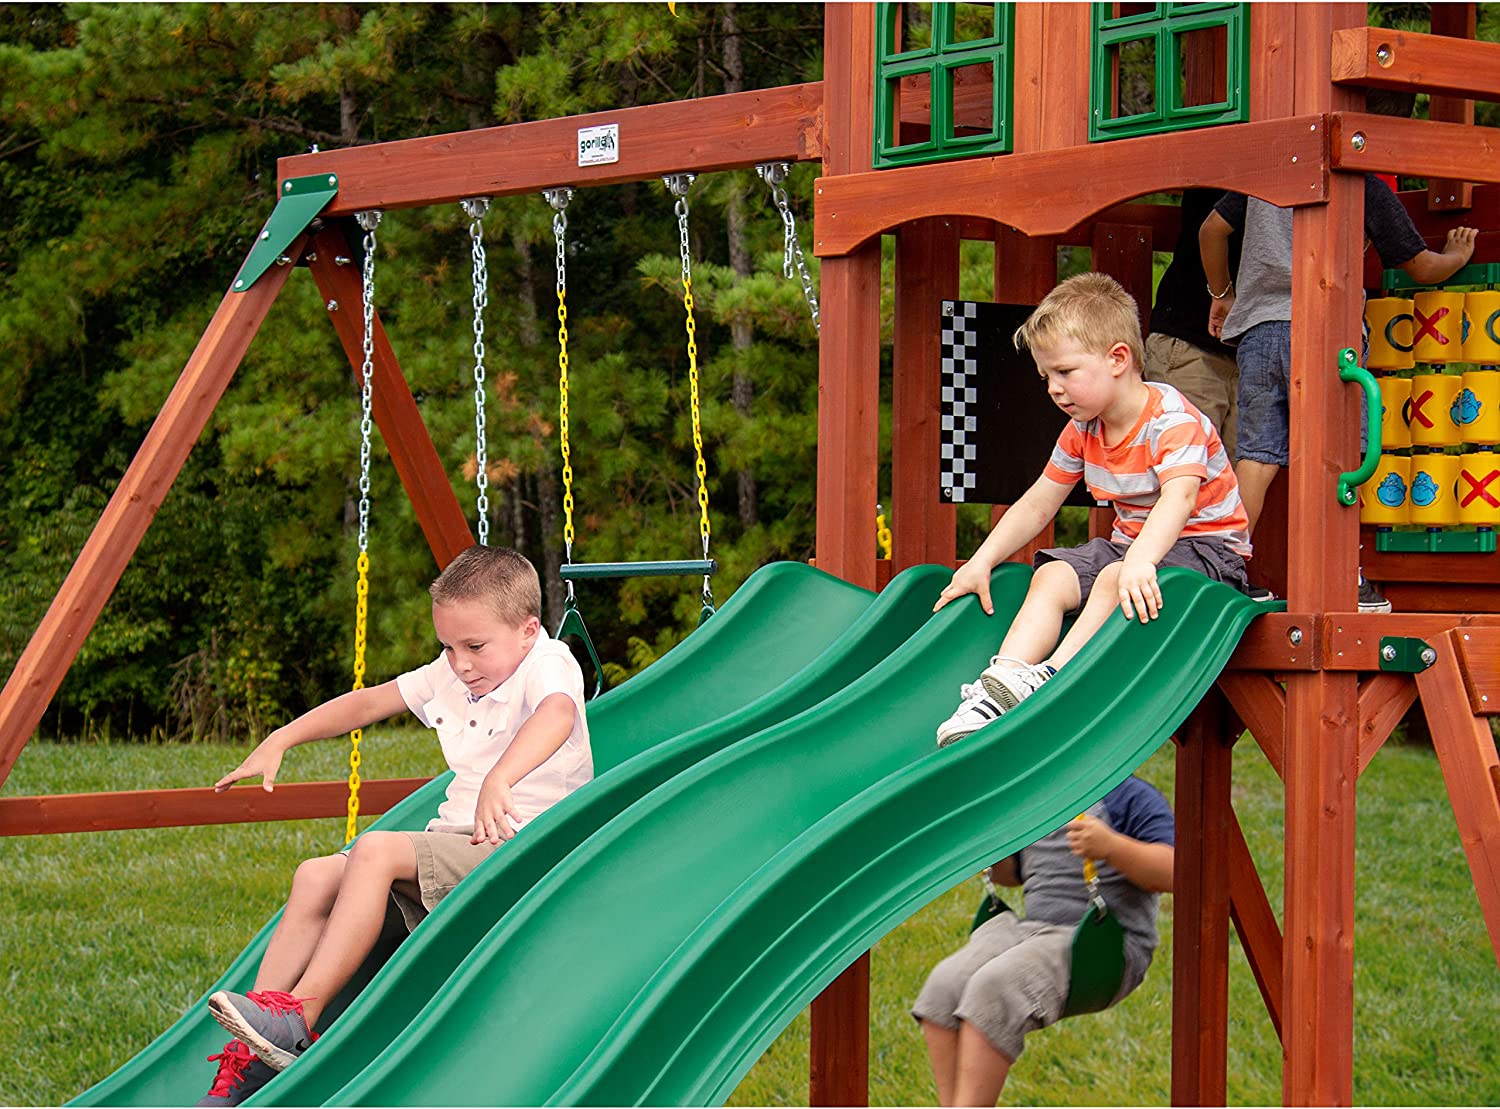 Two children are sliding down a pair of wave slides which is part of a large outdoor wooden play-set designed for kids.